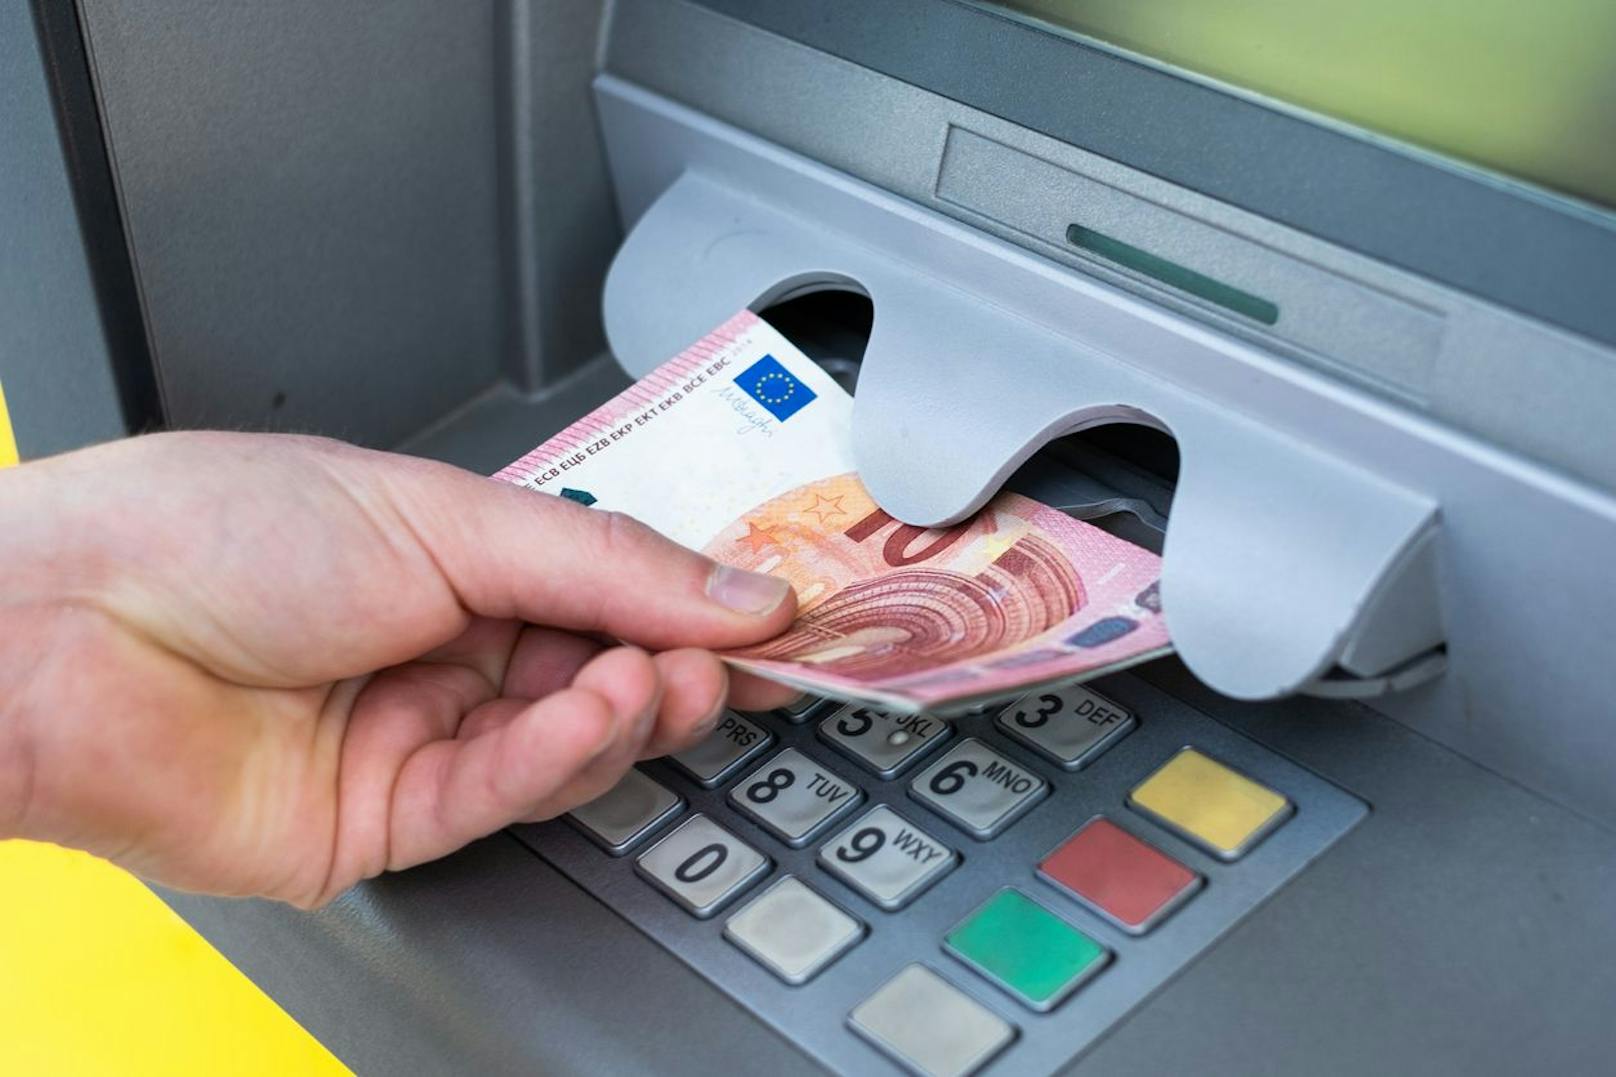 Bank and people concept with close up of hands choosing option on atm machine